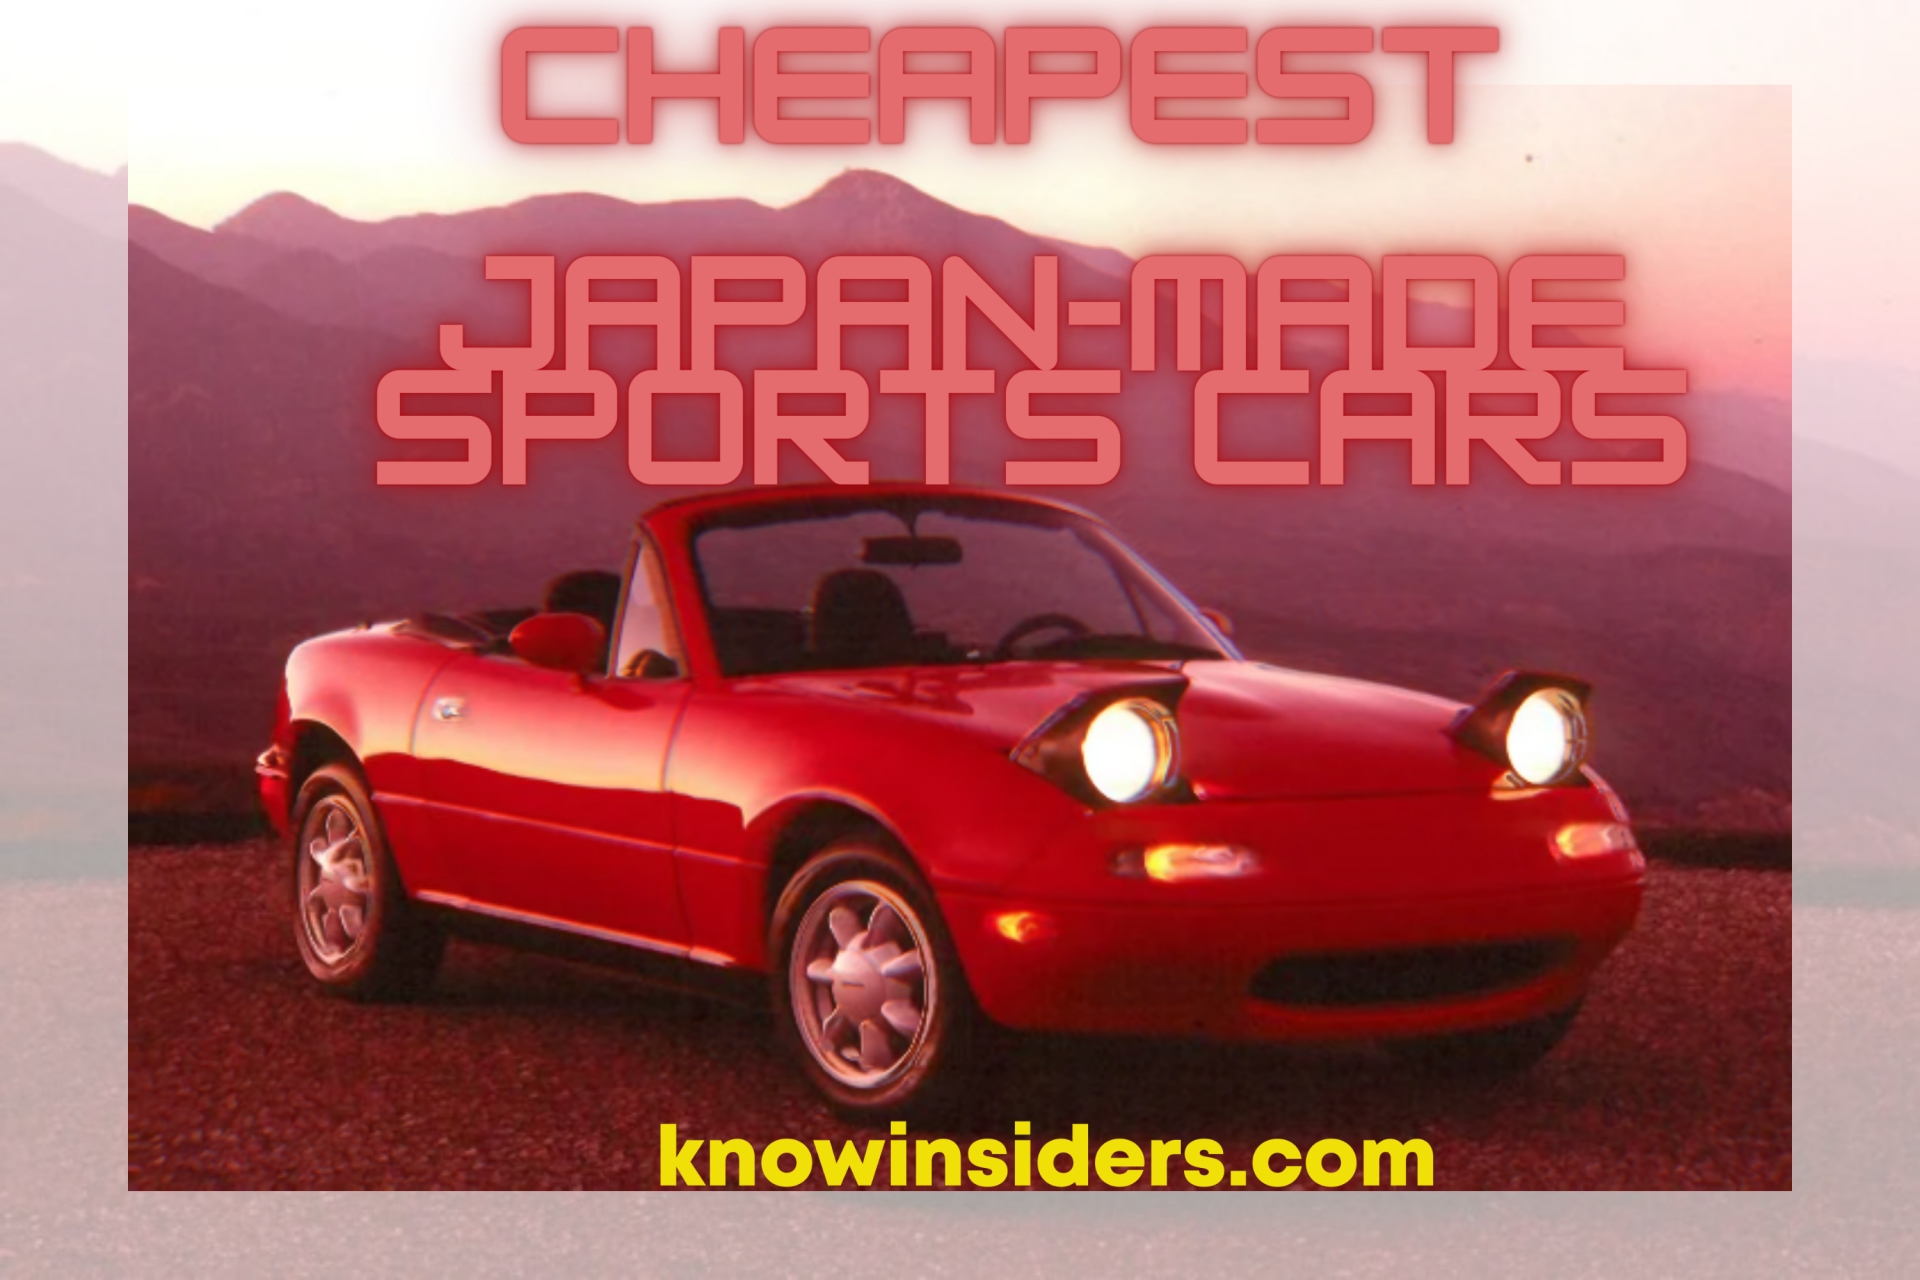 Top 10 Sports Cars - Cheapest Japan-Made Cars